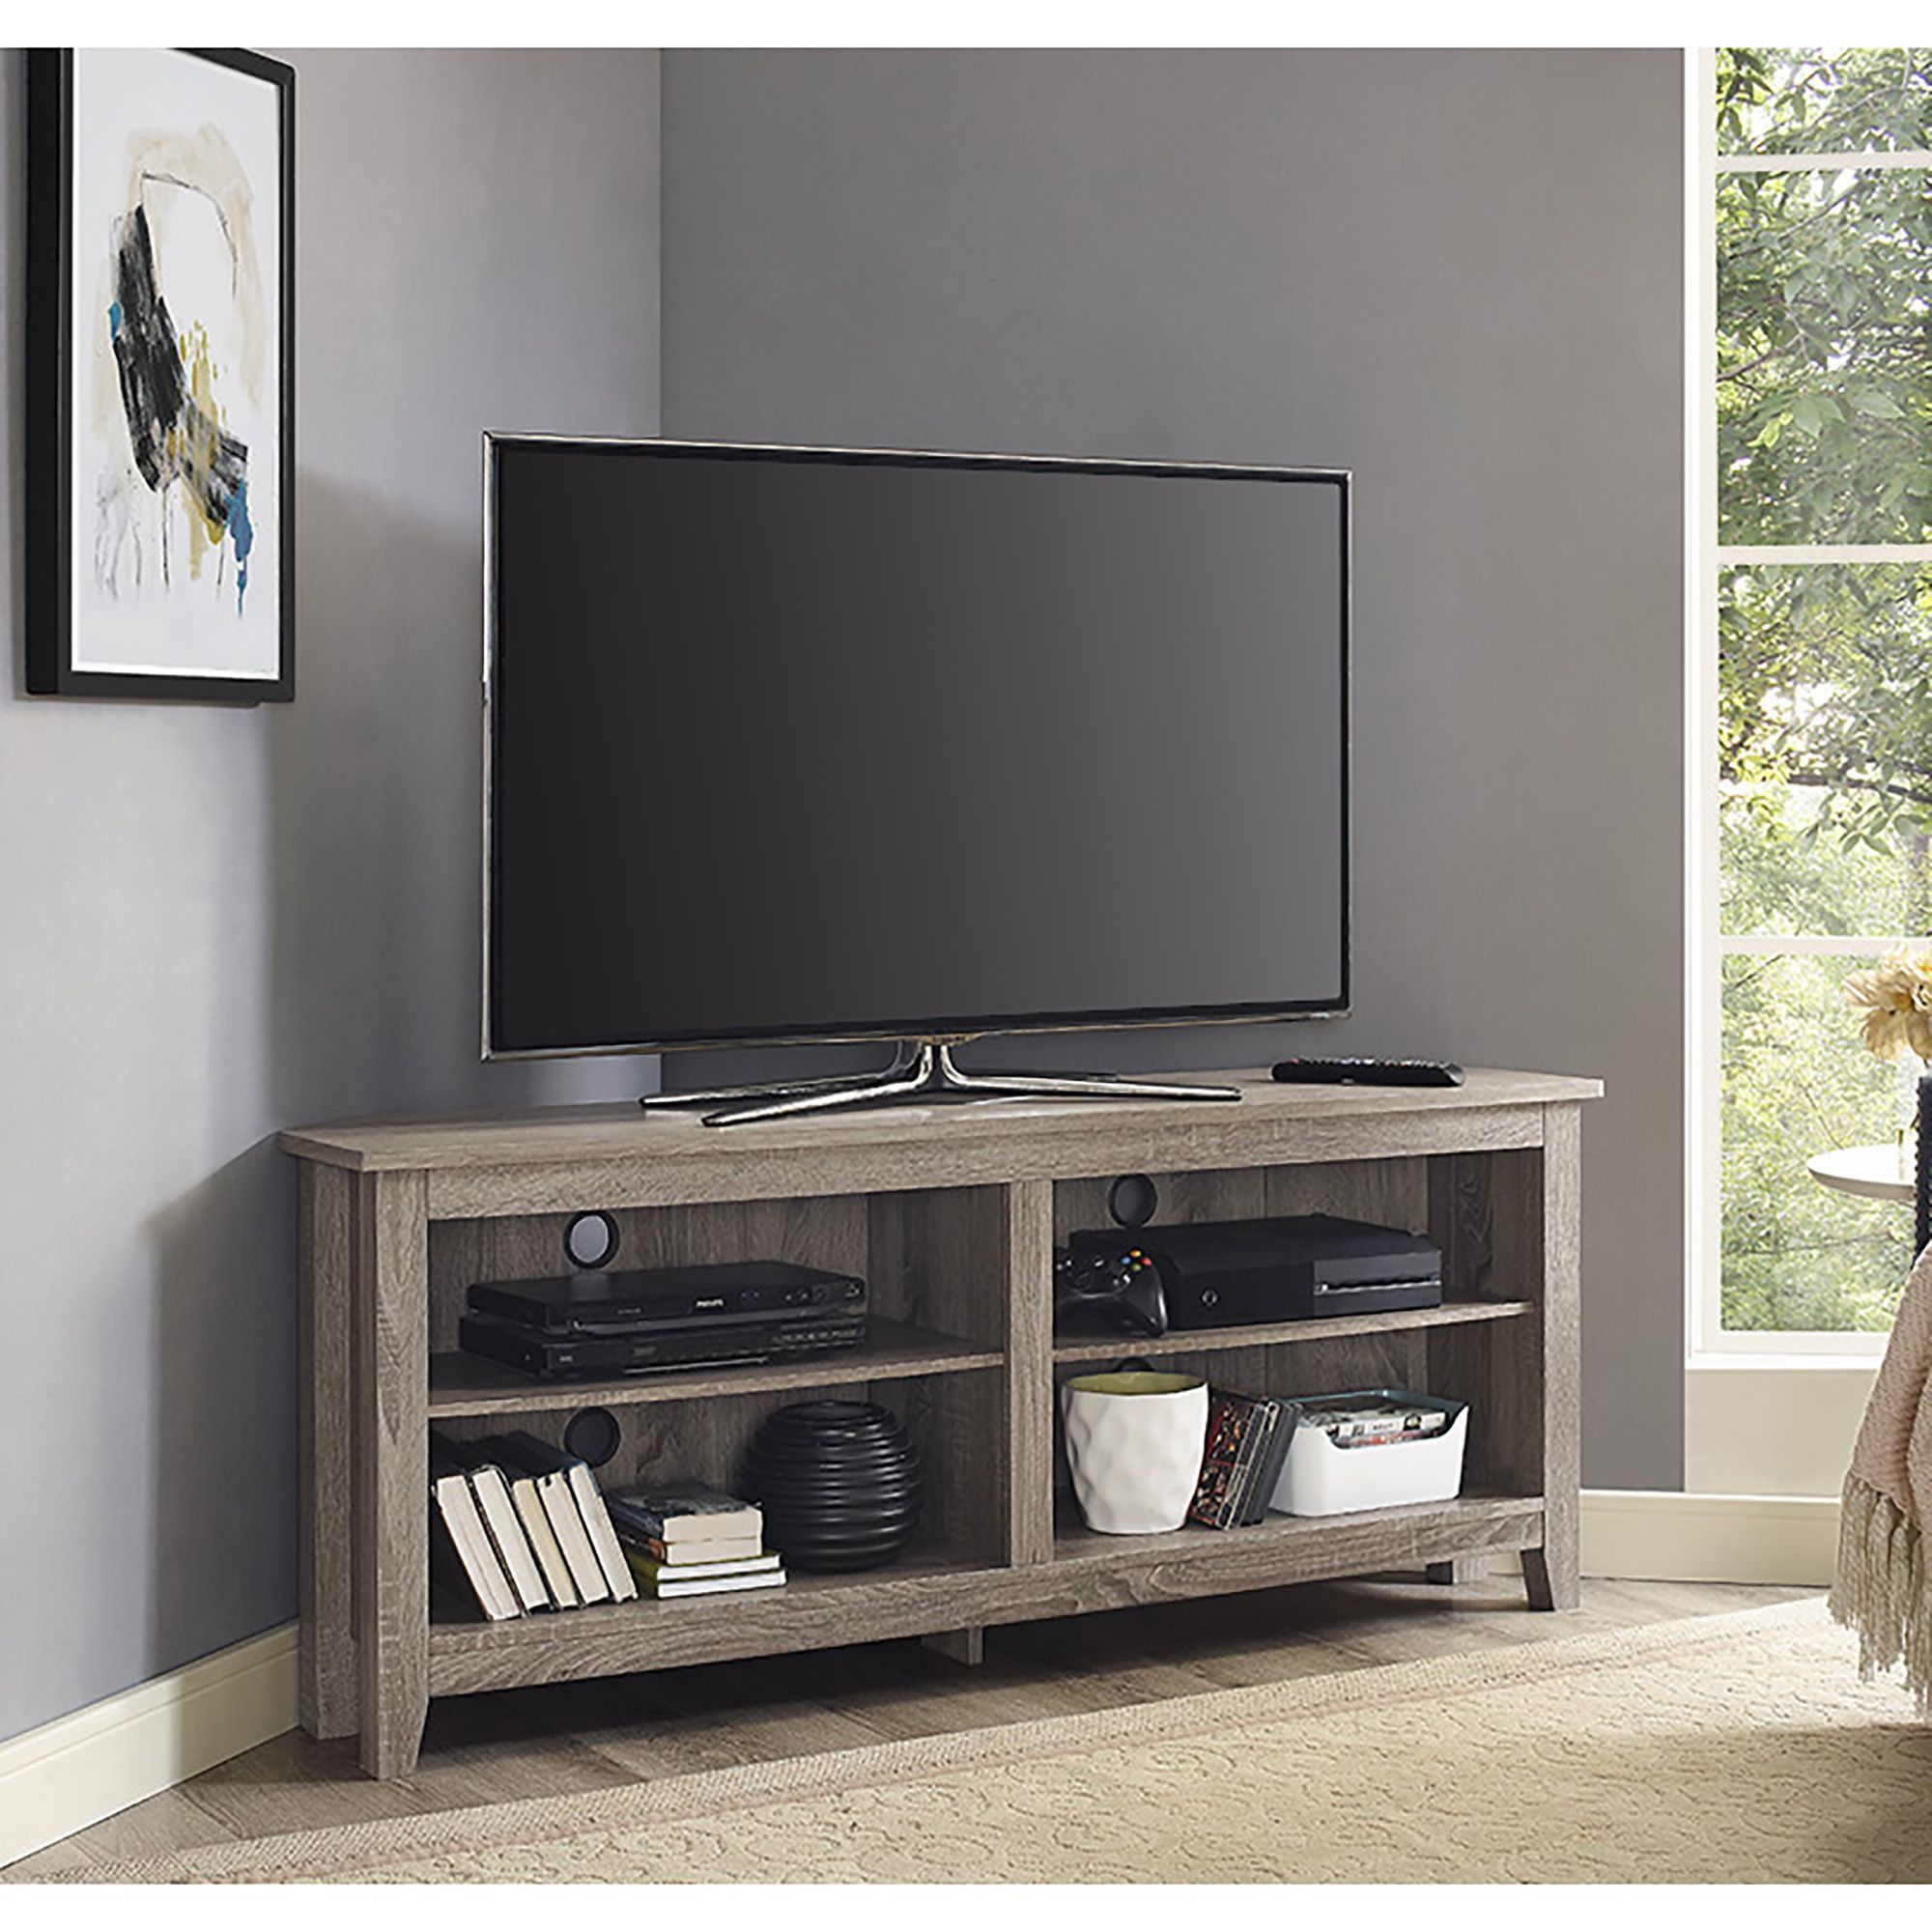 Online Shopping – Bedding, Furniture, Electronics, Jewelry Throughout Small Corner Tv Stands (View 1 of 15)